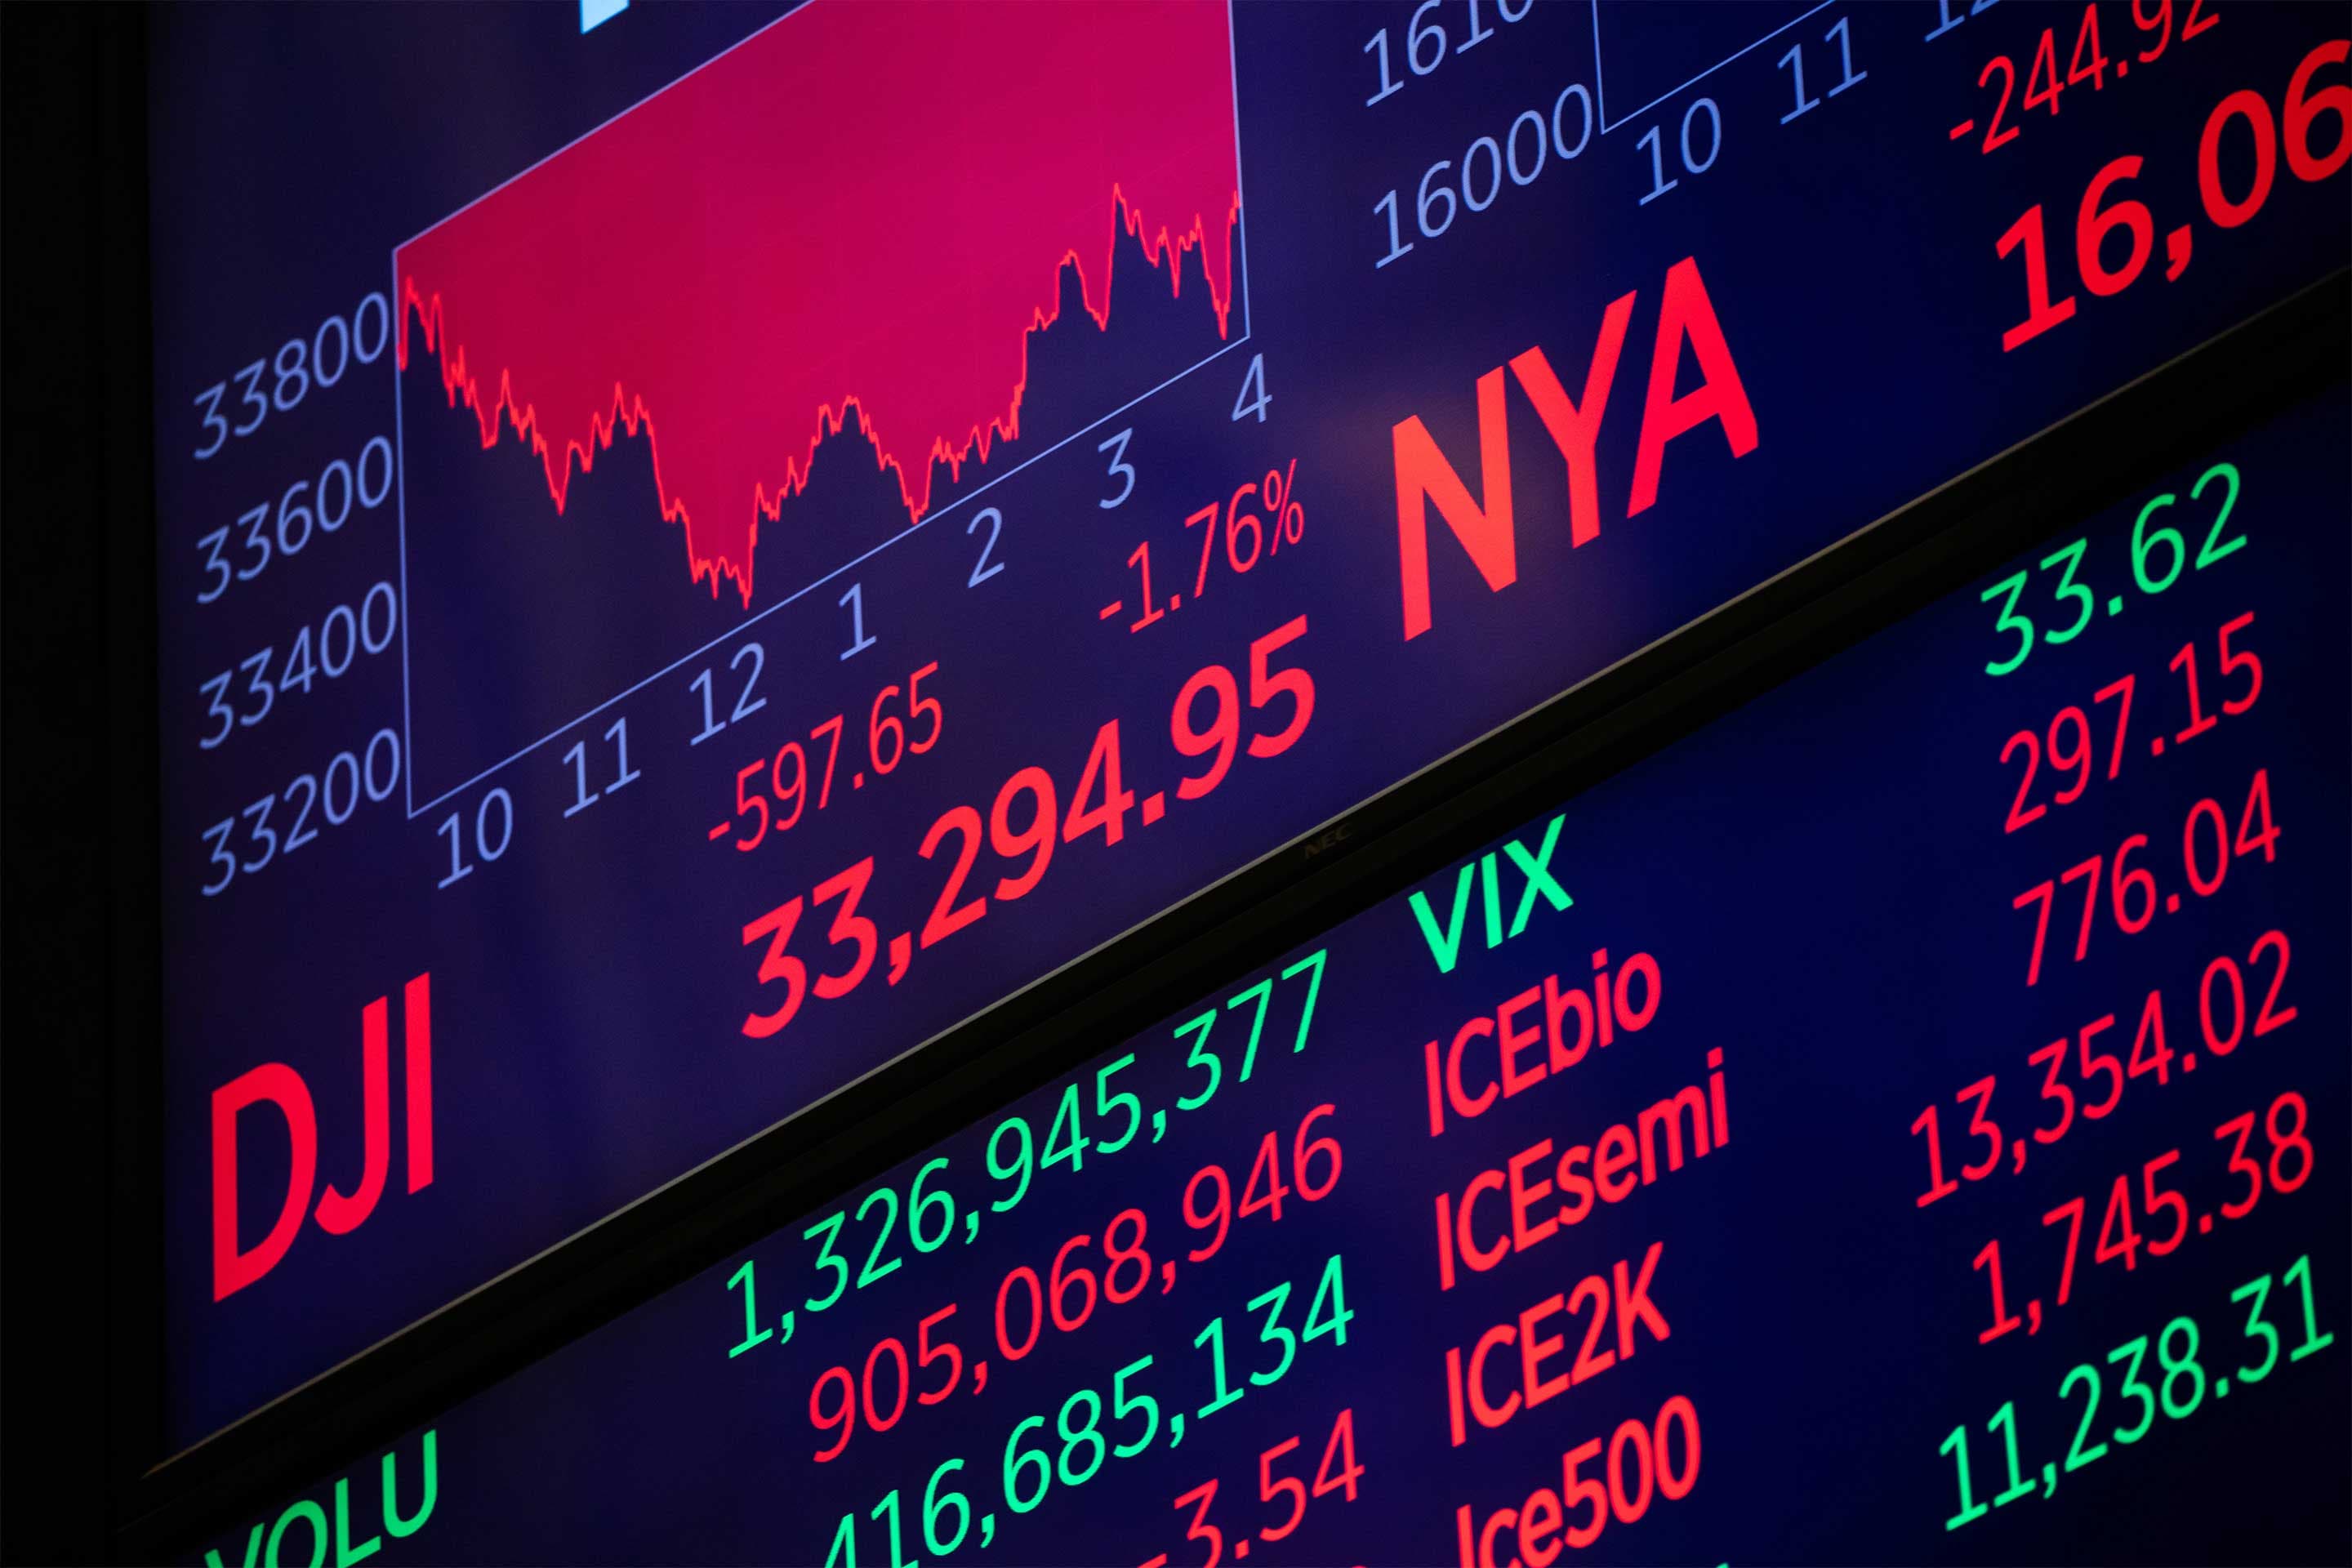 Financial Health Analysis of Y:NYSE - Challenges and Resilience